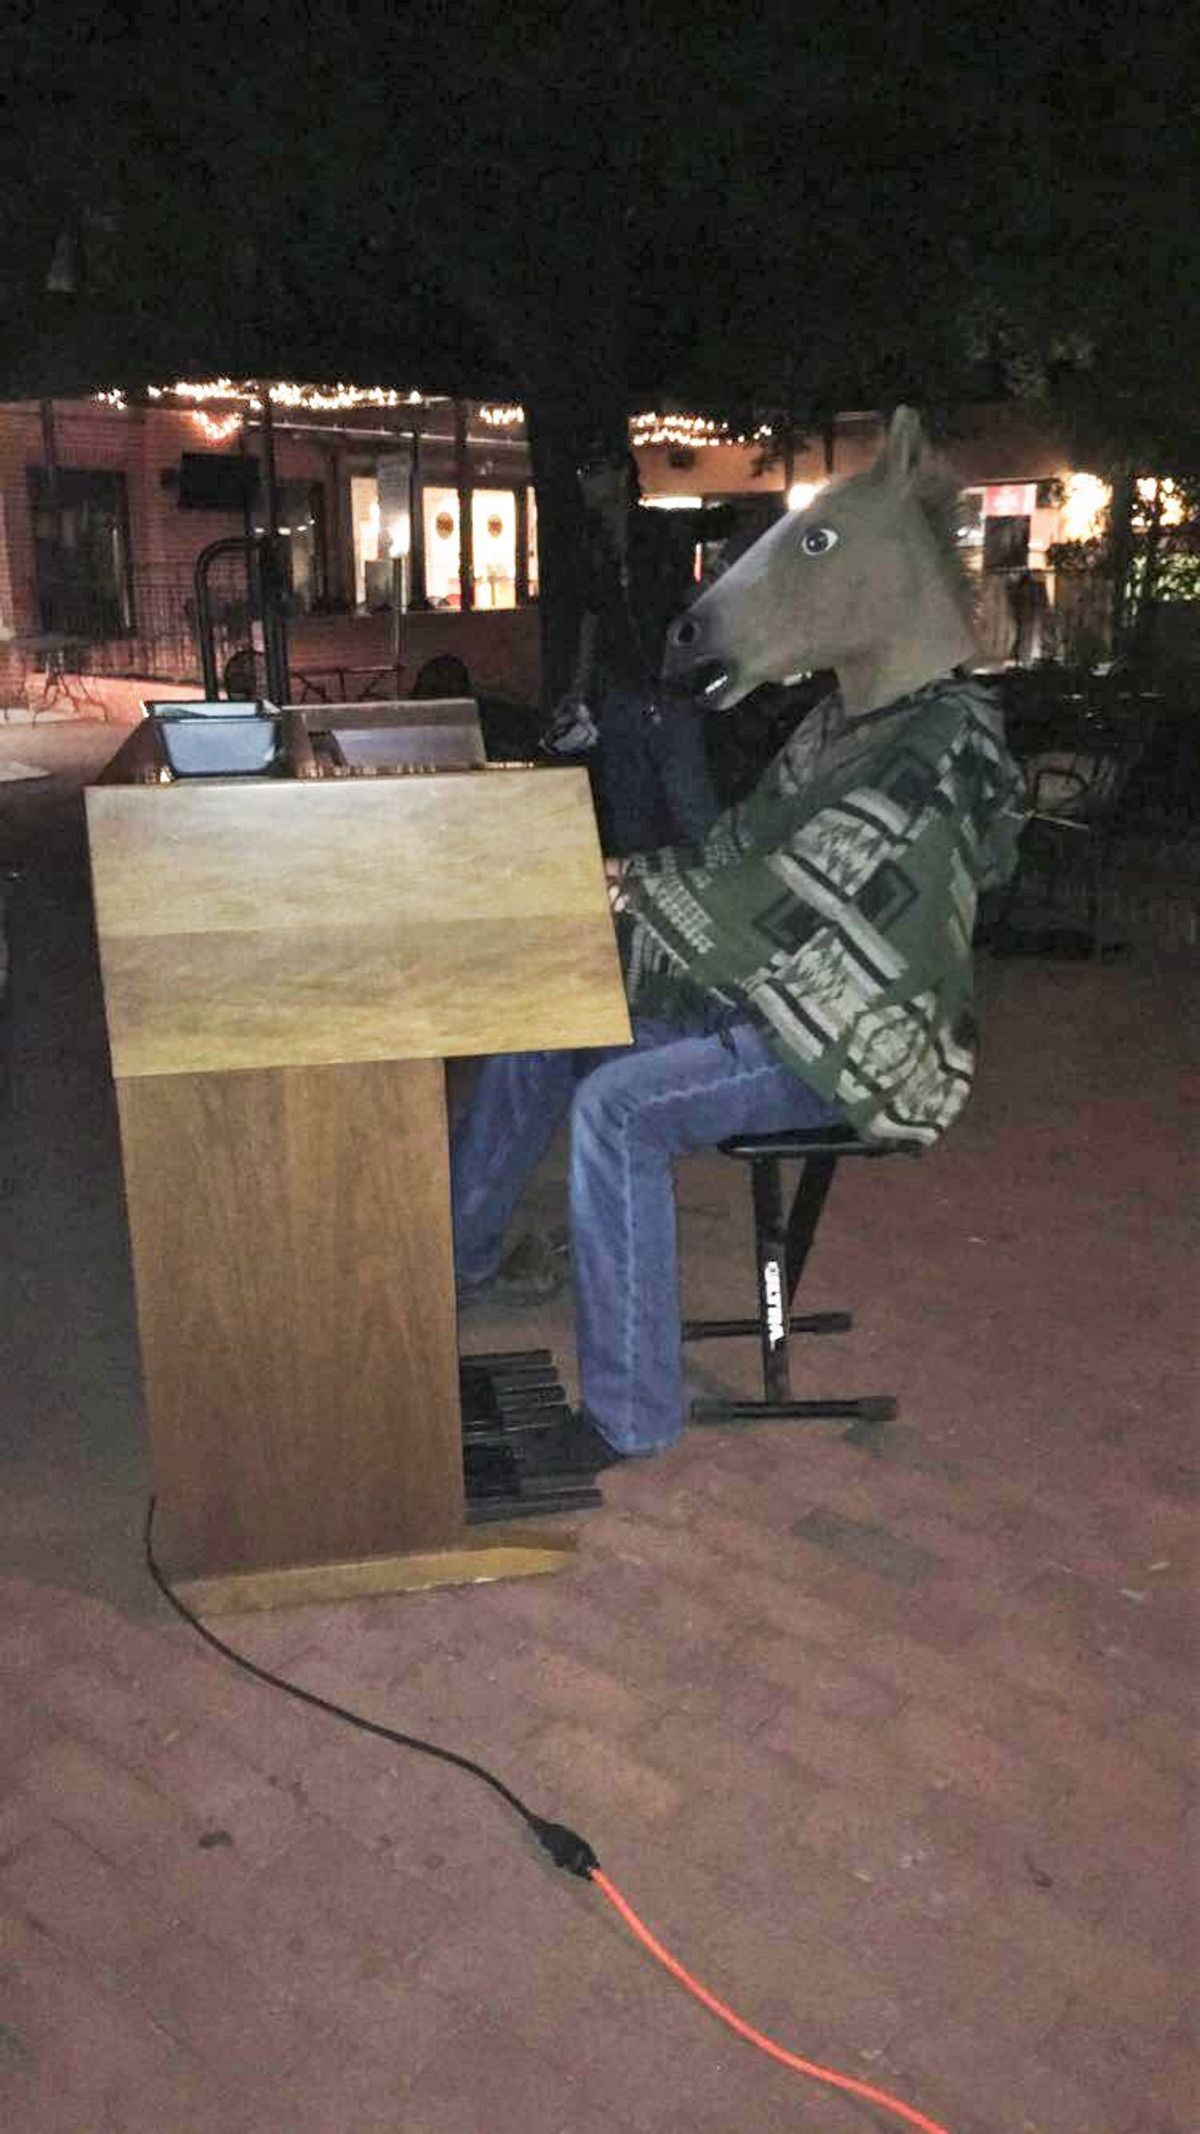 'Support Your Local Artists': Horse Plays Piano On Franklin Street